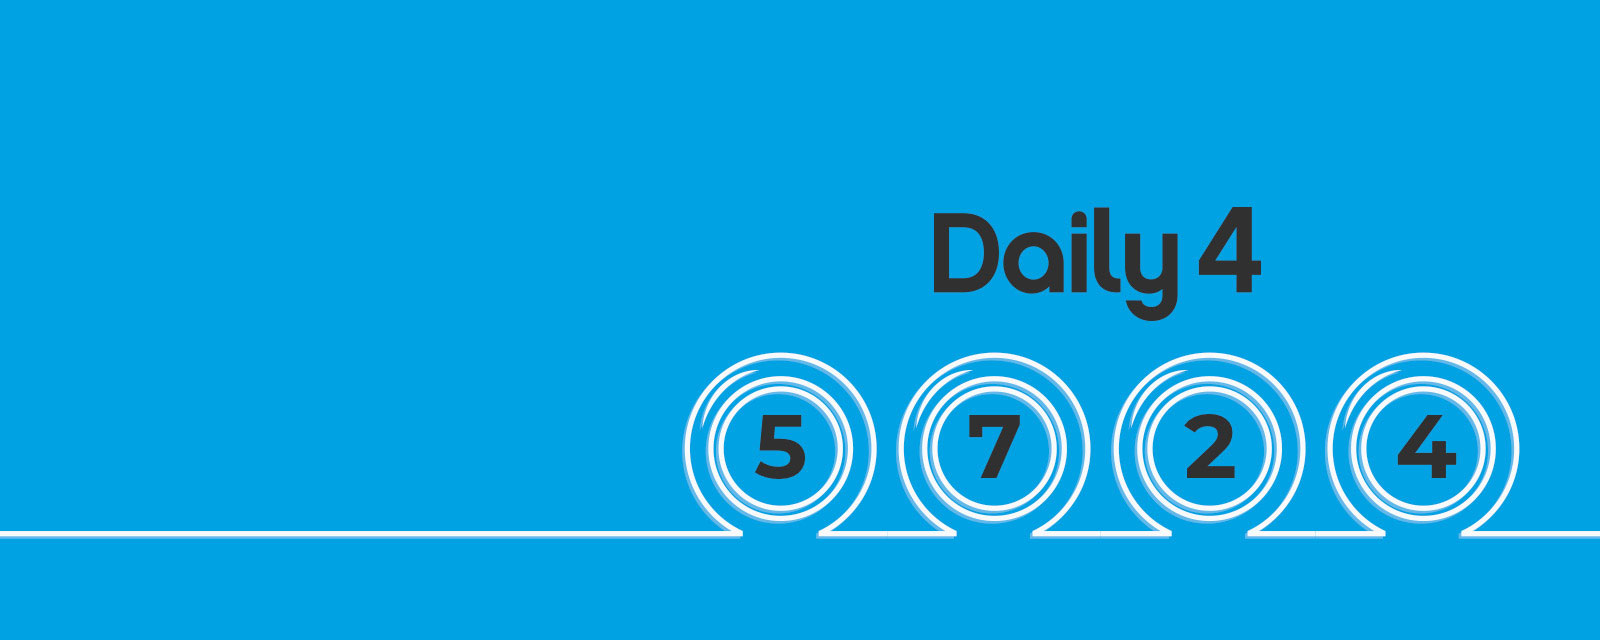 texas daily 4 past winning numbers